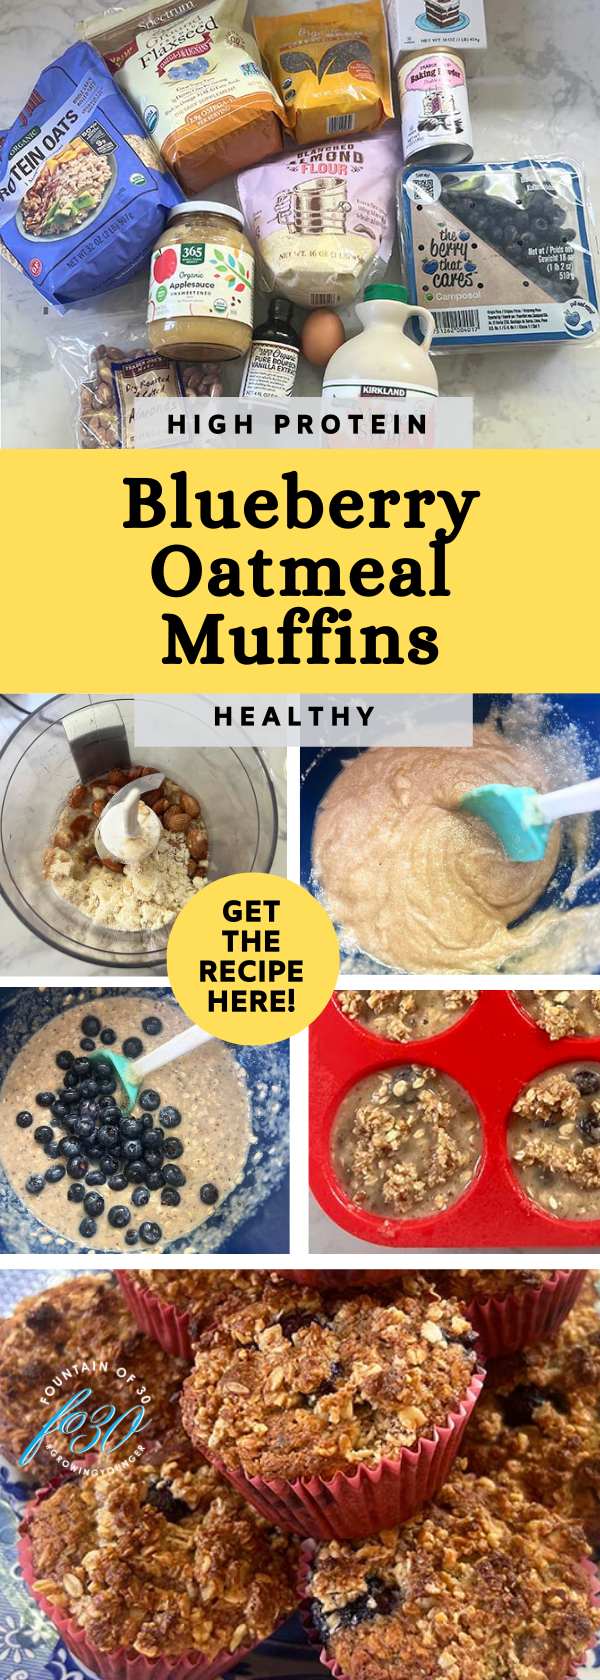 how to make blueberry oatmeal muffins healthy fountainof30